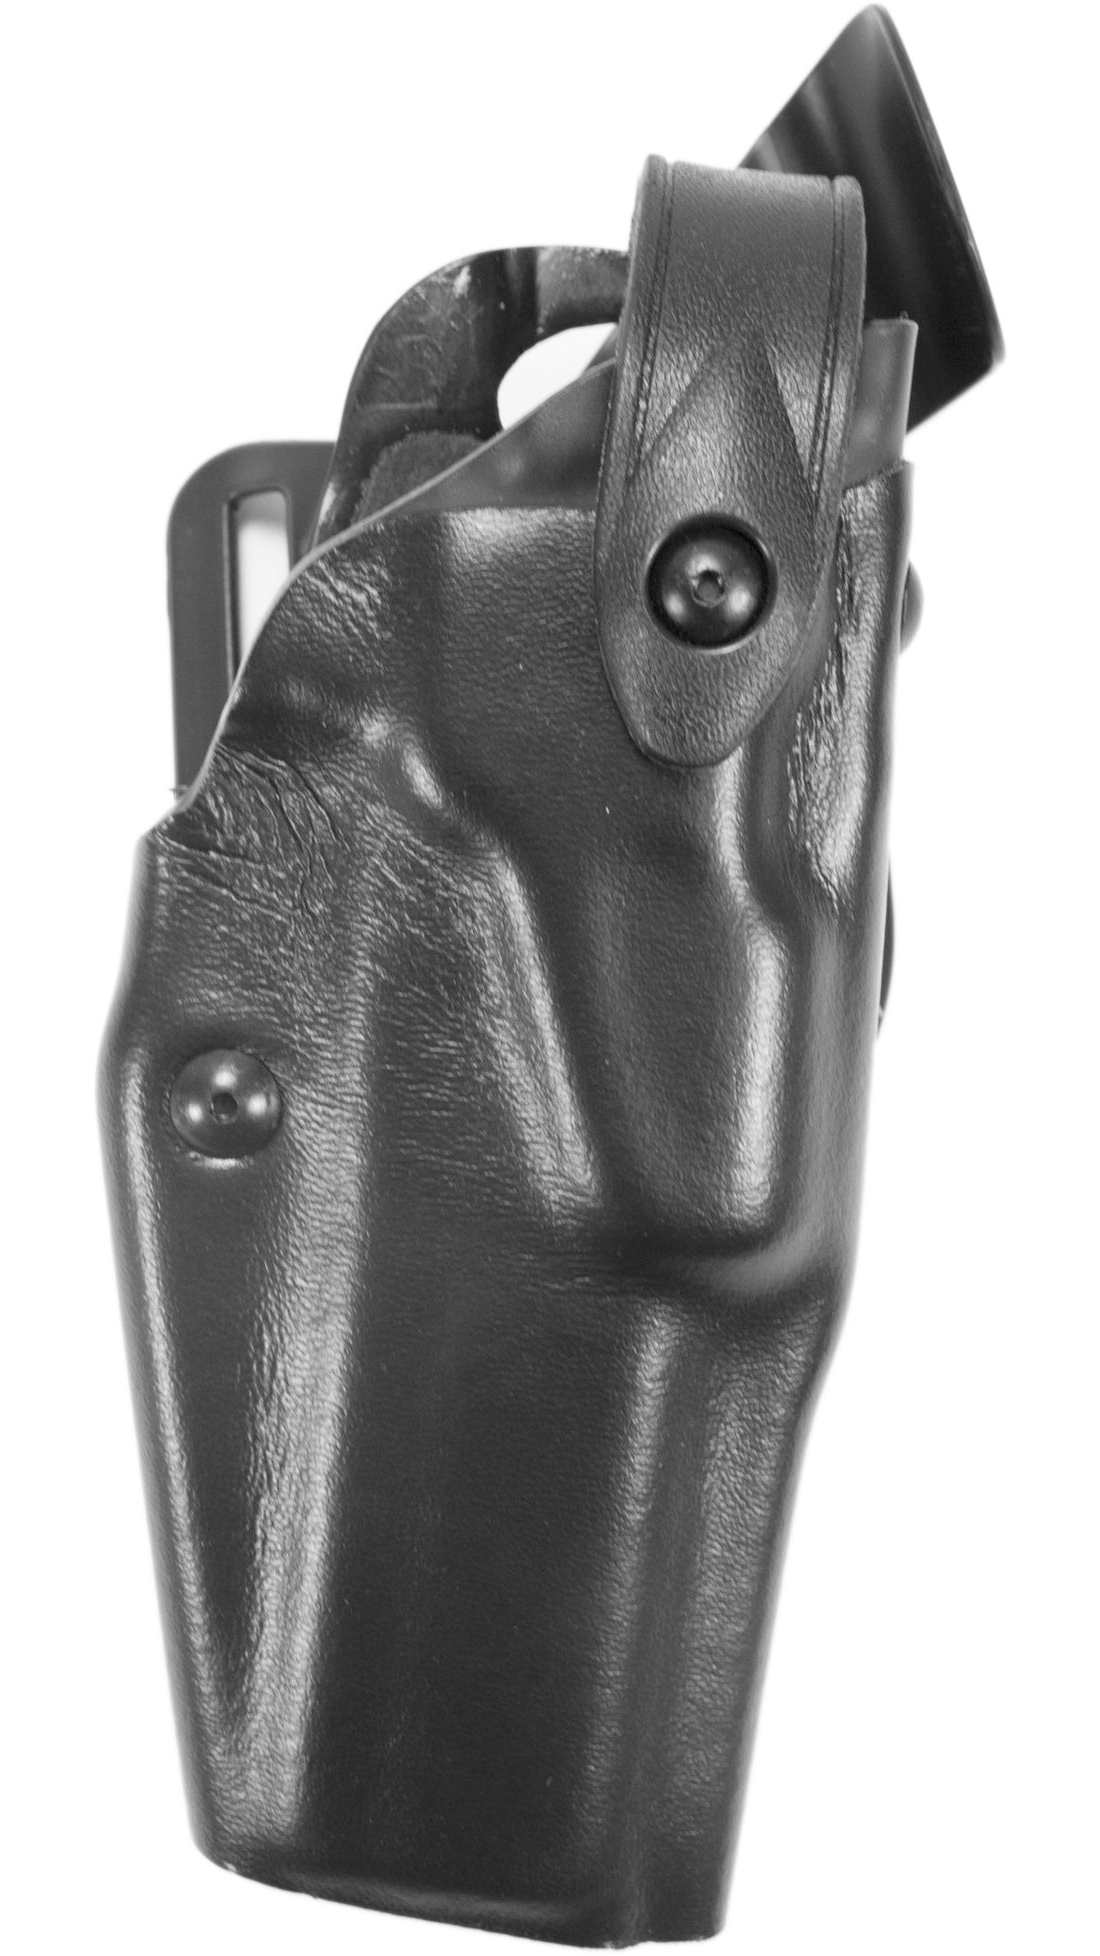 Safariland Model RGR-UBL Drop Leg Holster  20% Off 5 Star Rating w/ Free  Shipping and Handling